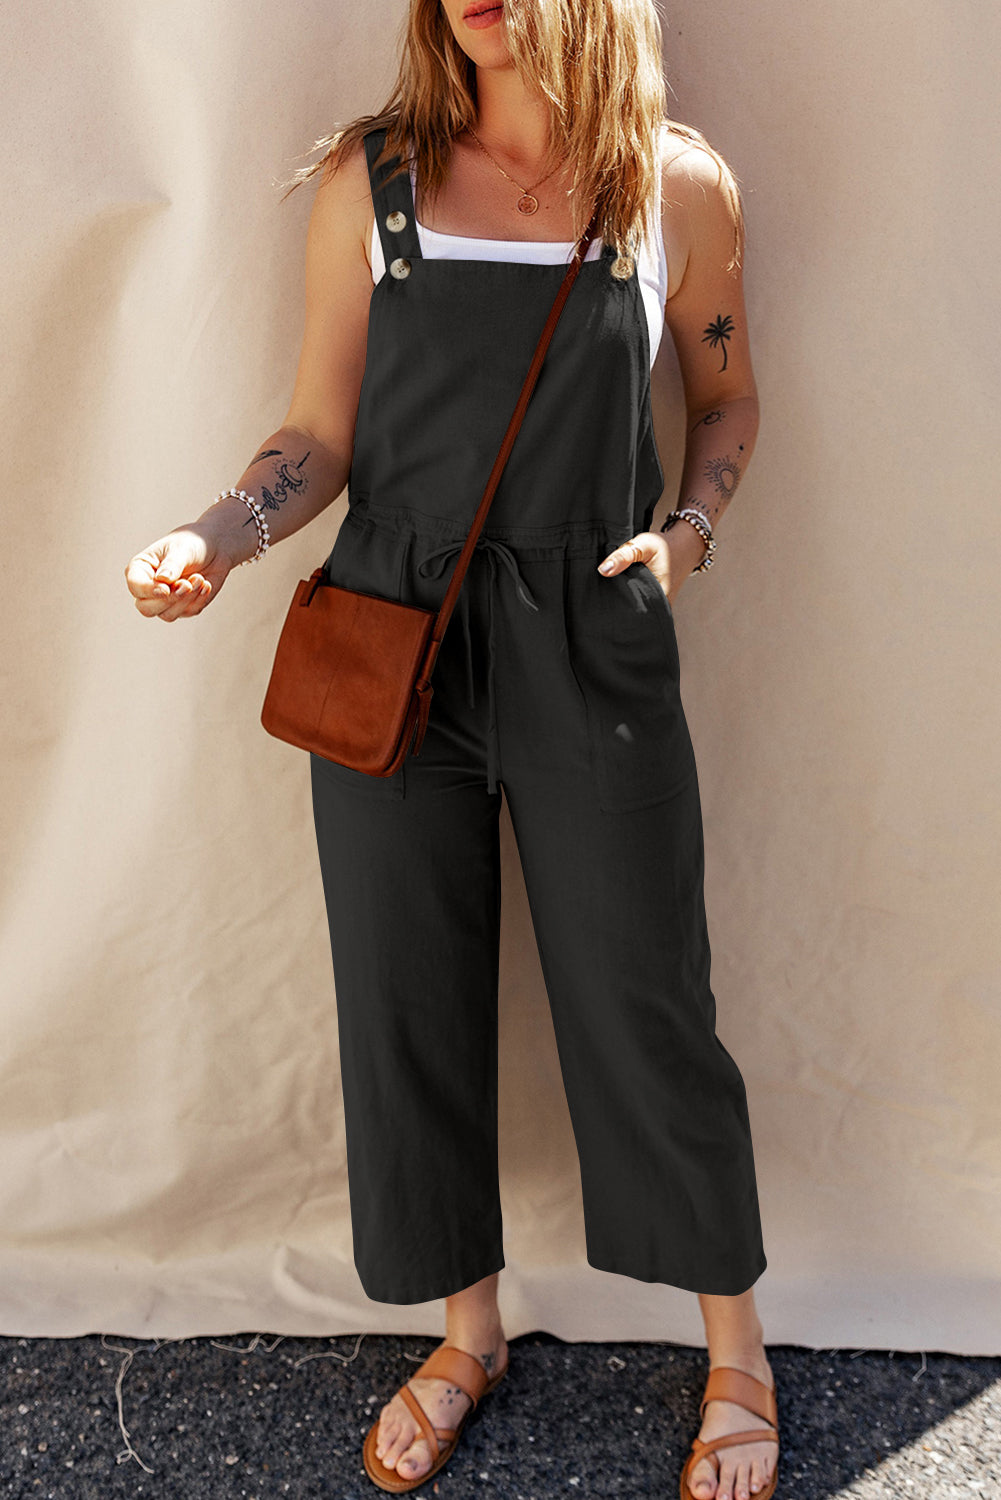 Black Drawstring Buttoned Straps Cropped Overalls - Stylish and Comfortable Women's Jumpsuit